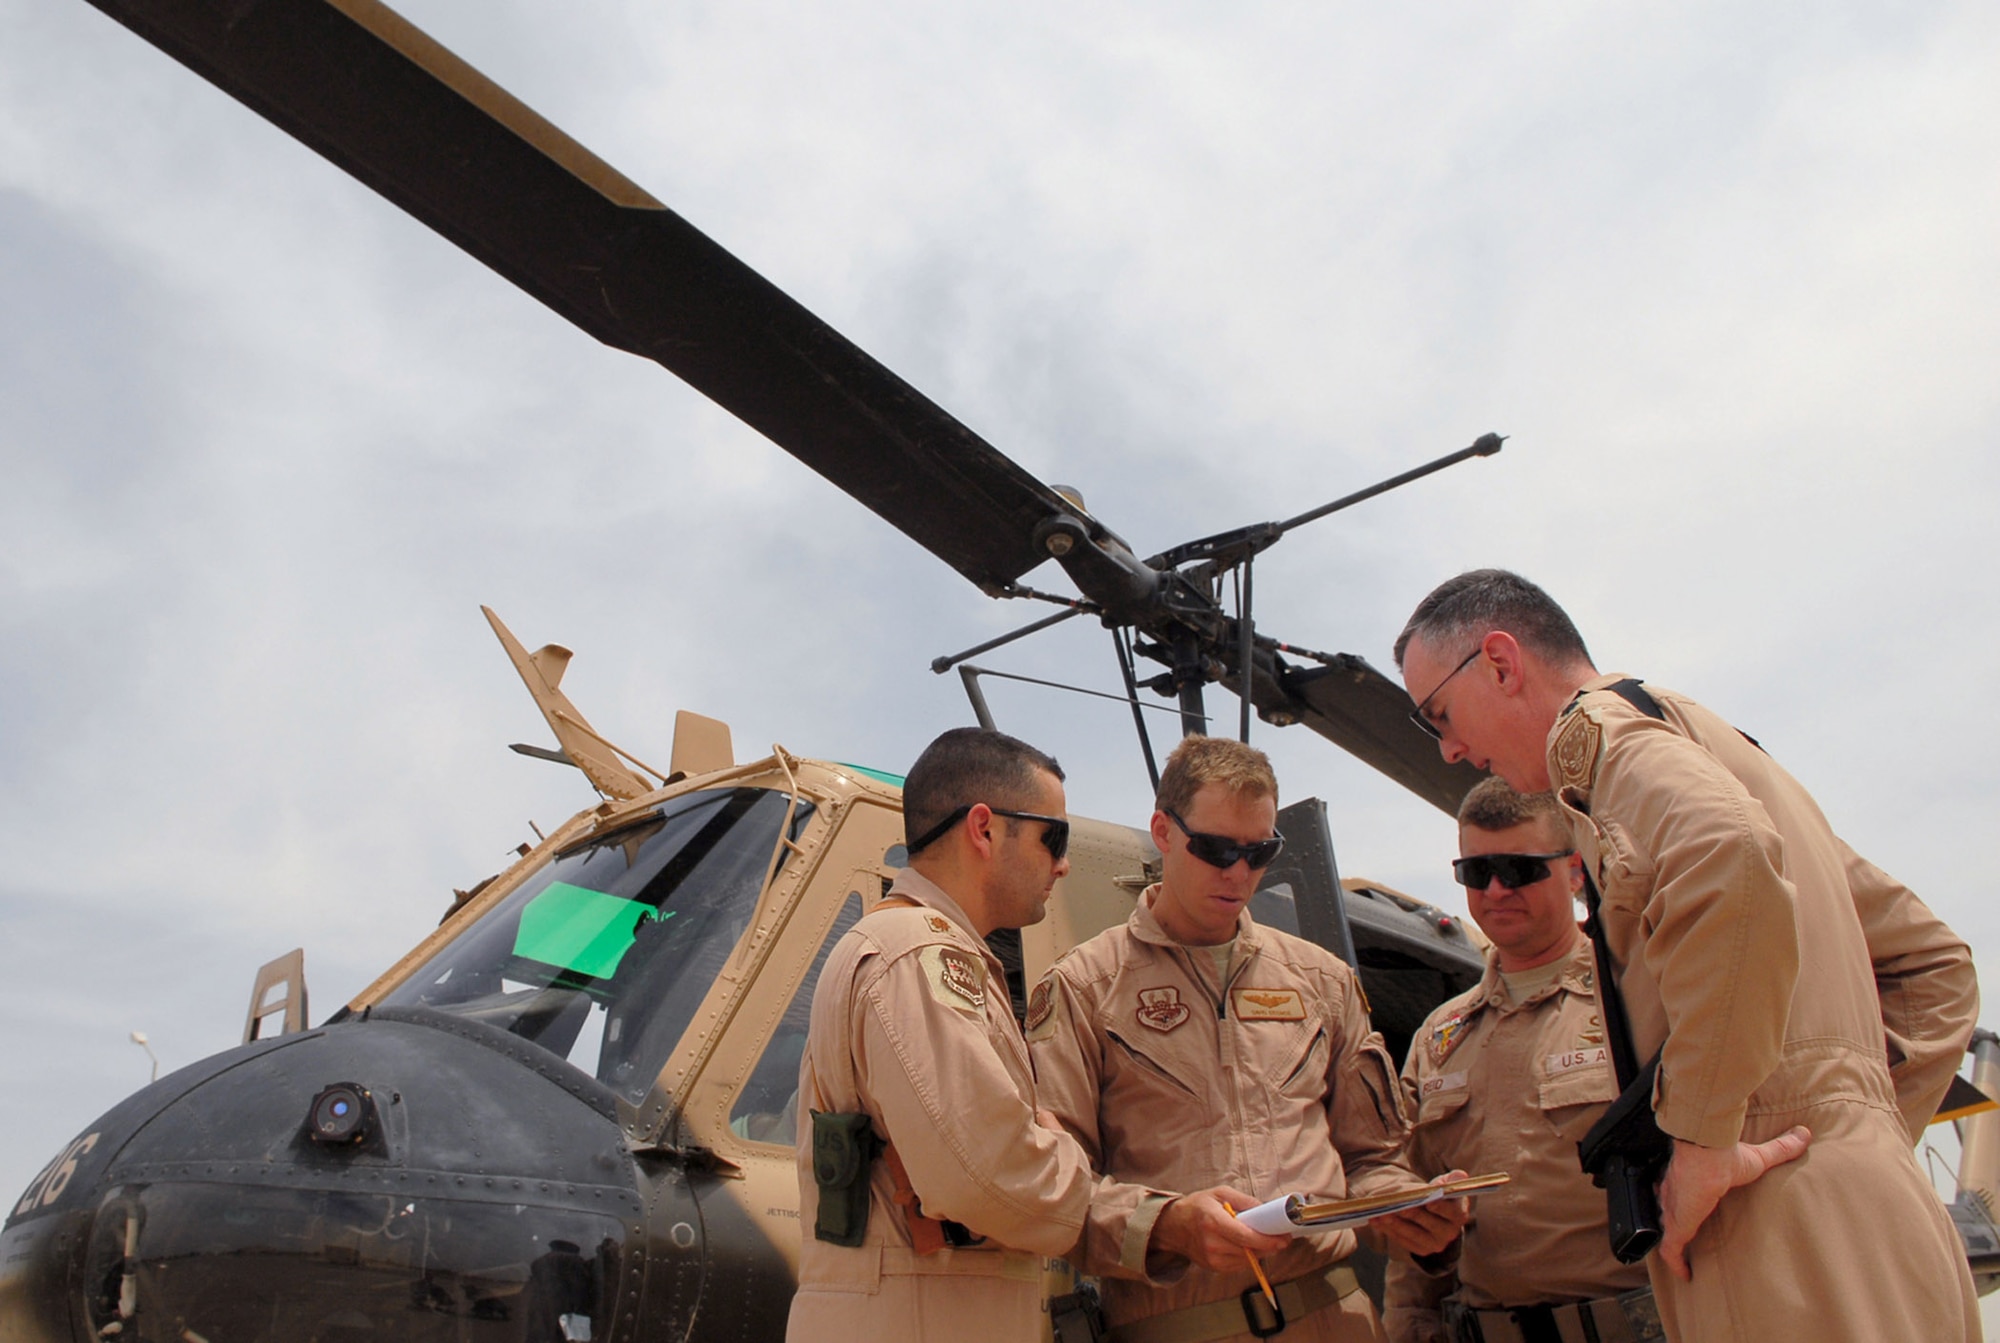 Pilots and flight medics discuss an Iraqi air force medical evacuation mission flown May 14 from the Air Force Theater Hospital at Balad Air Base, Iraq, to the U.S. Army's 86th Combat Support Hospital in Baghdad. (U.S. Air Force photo/Senior Airman Julianne Showalter)